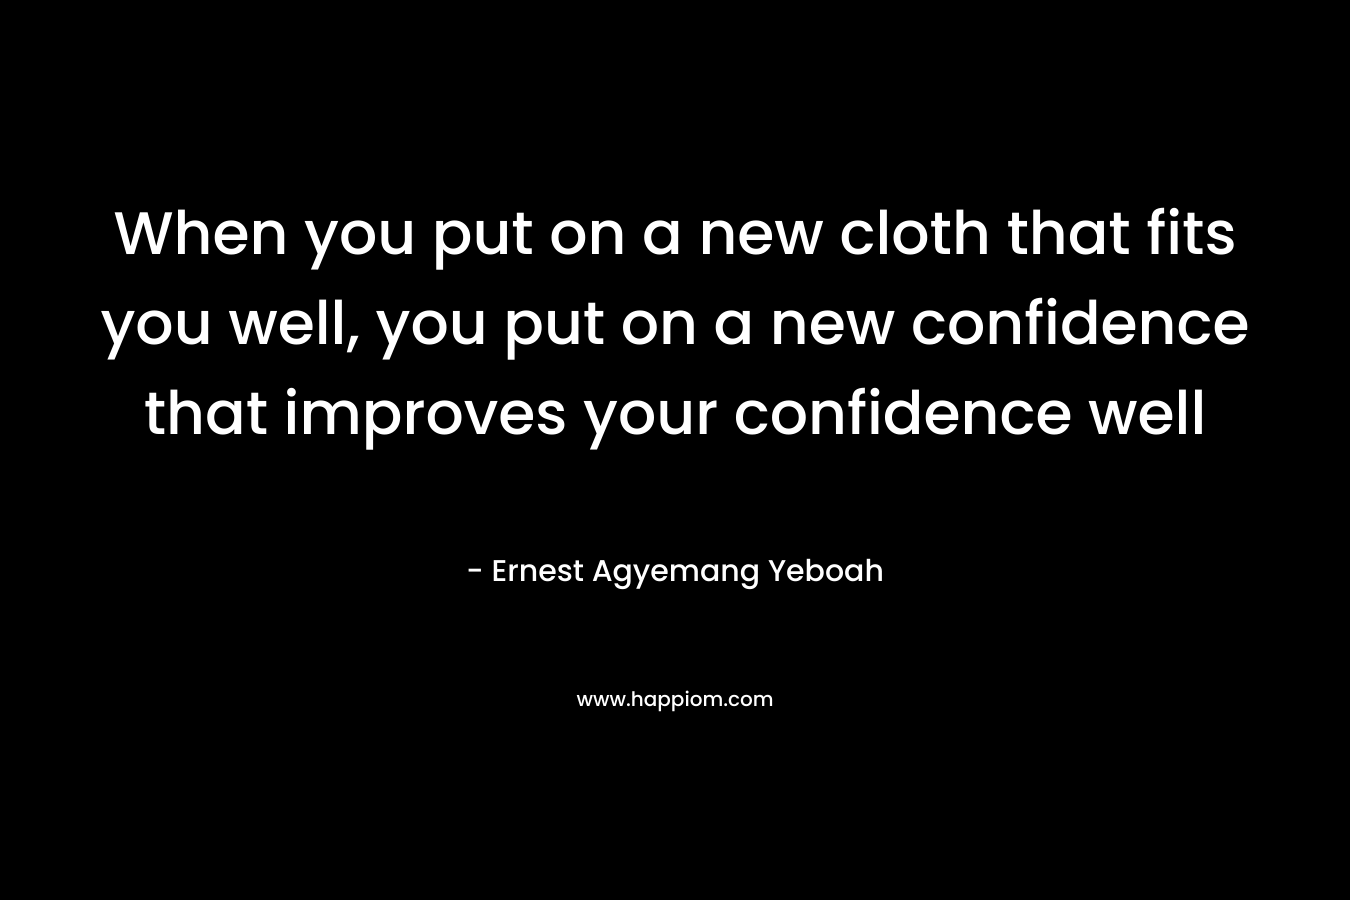 When you put on a new cloth that fits you well, you put on a new confidence that improves your confidence well